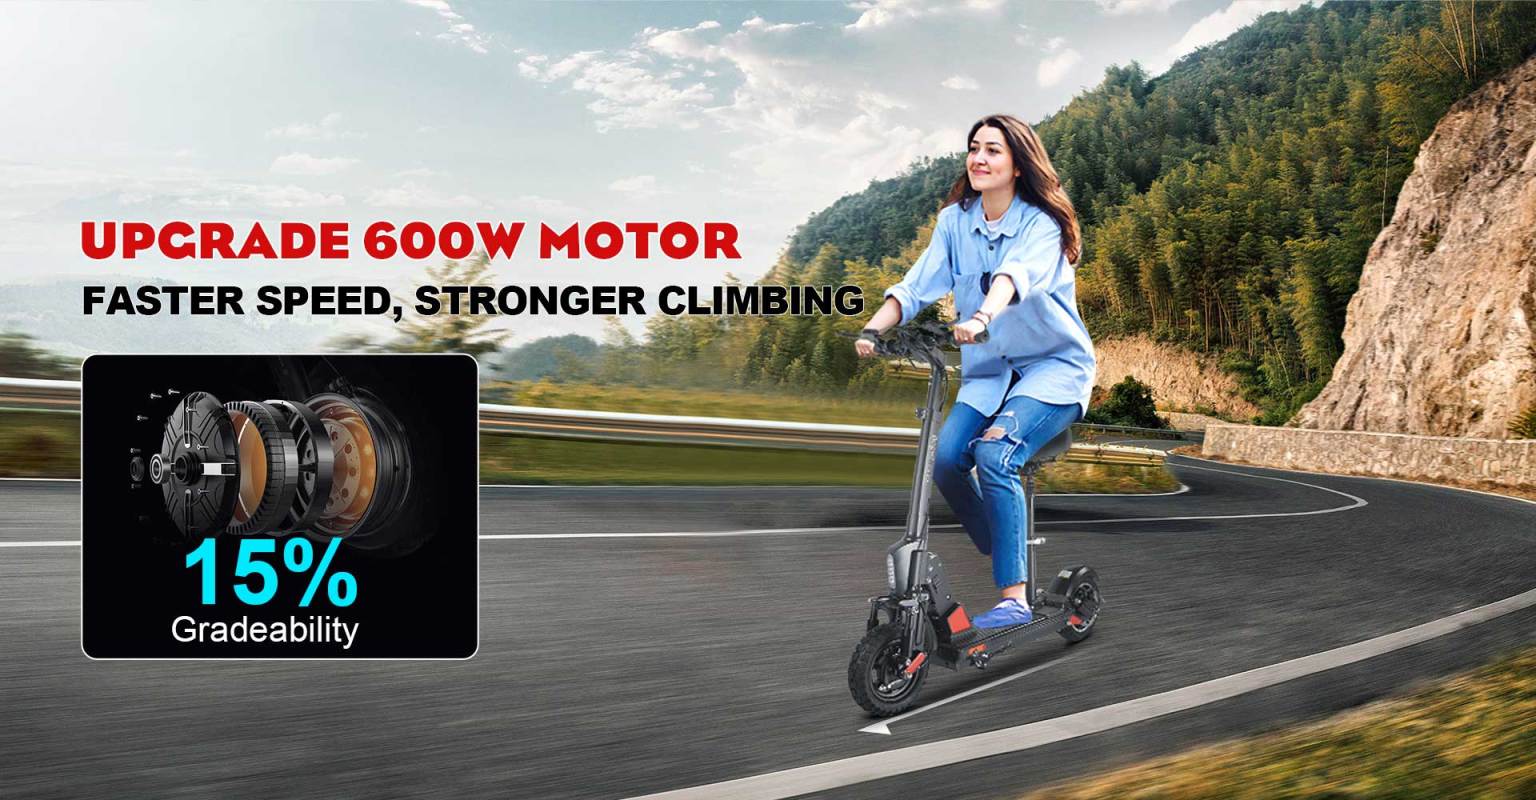 BOGIST C1 PRO electric scooter